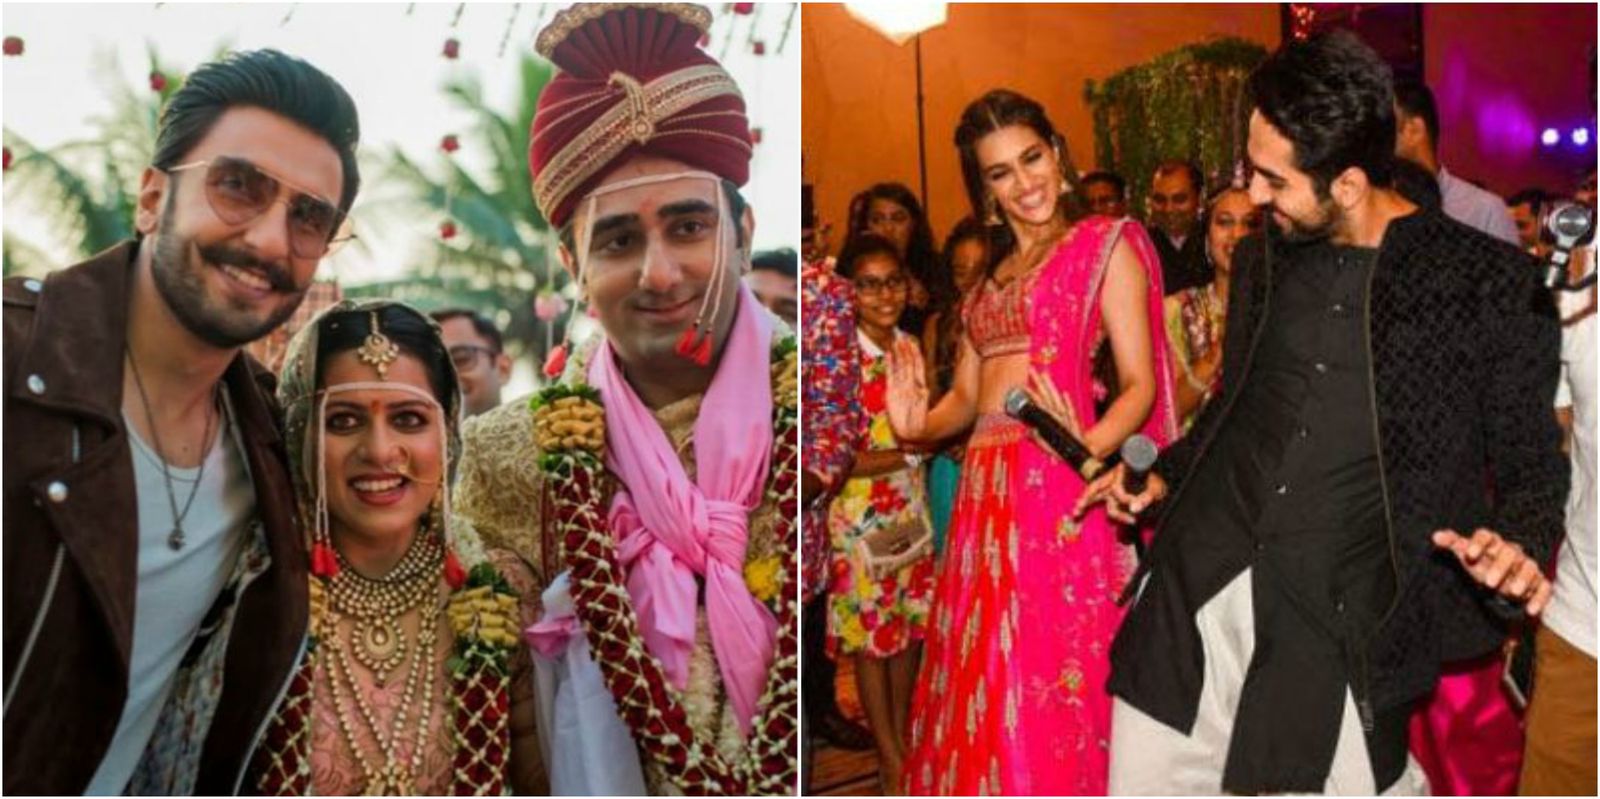 Not Just You, But These Bollywood Celebrities Also Gatecrashed Weddings For Fun